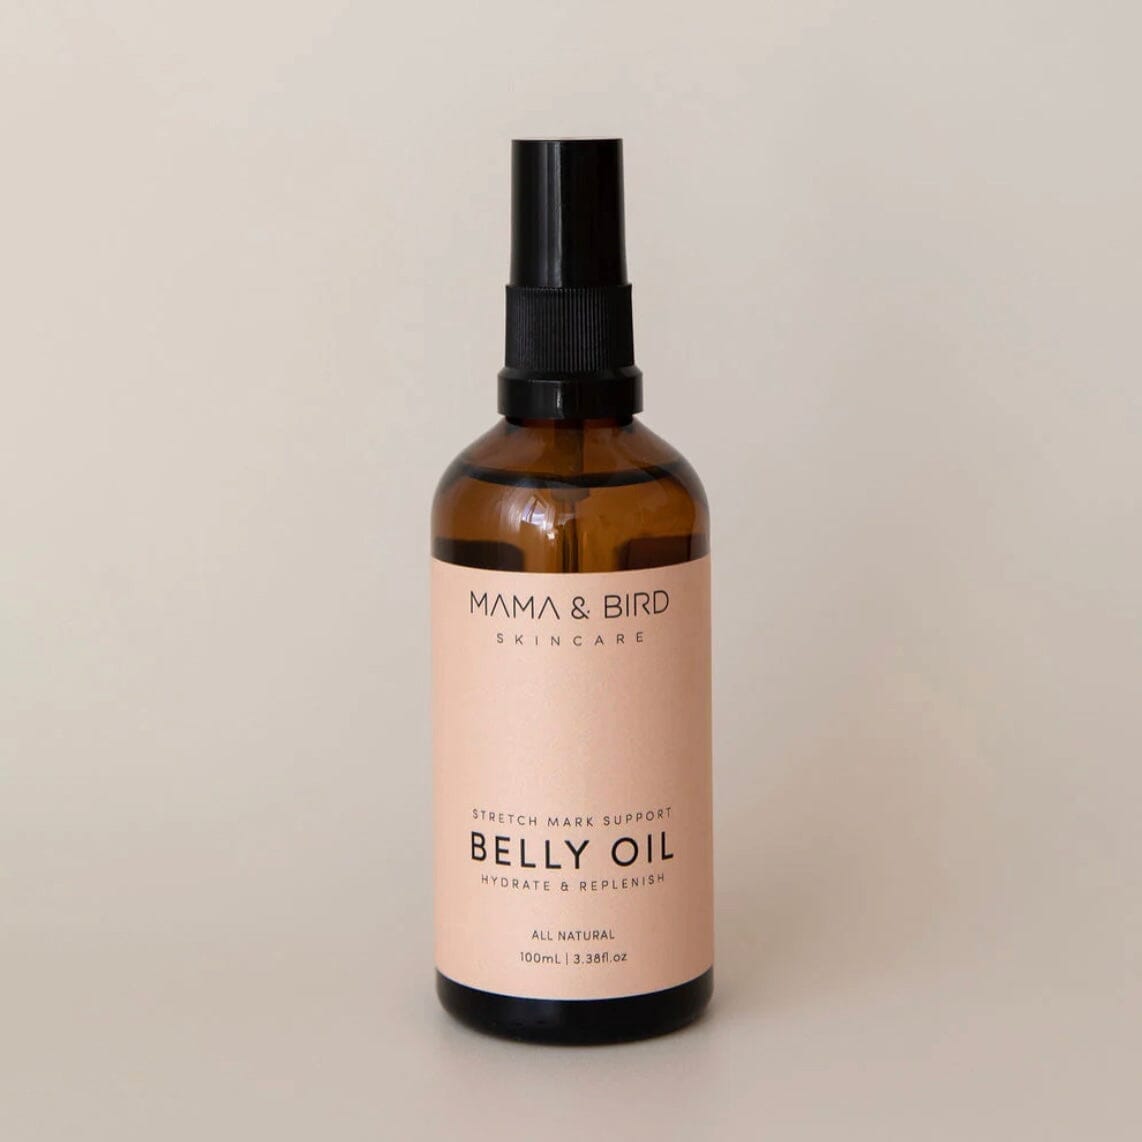 BELLY OIL Baboxie 